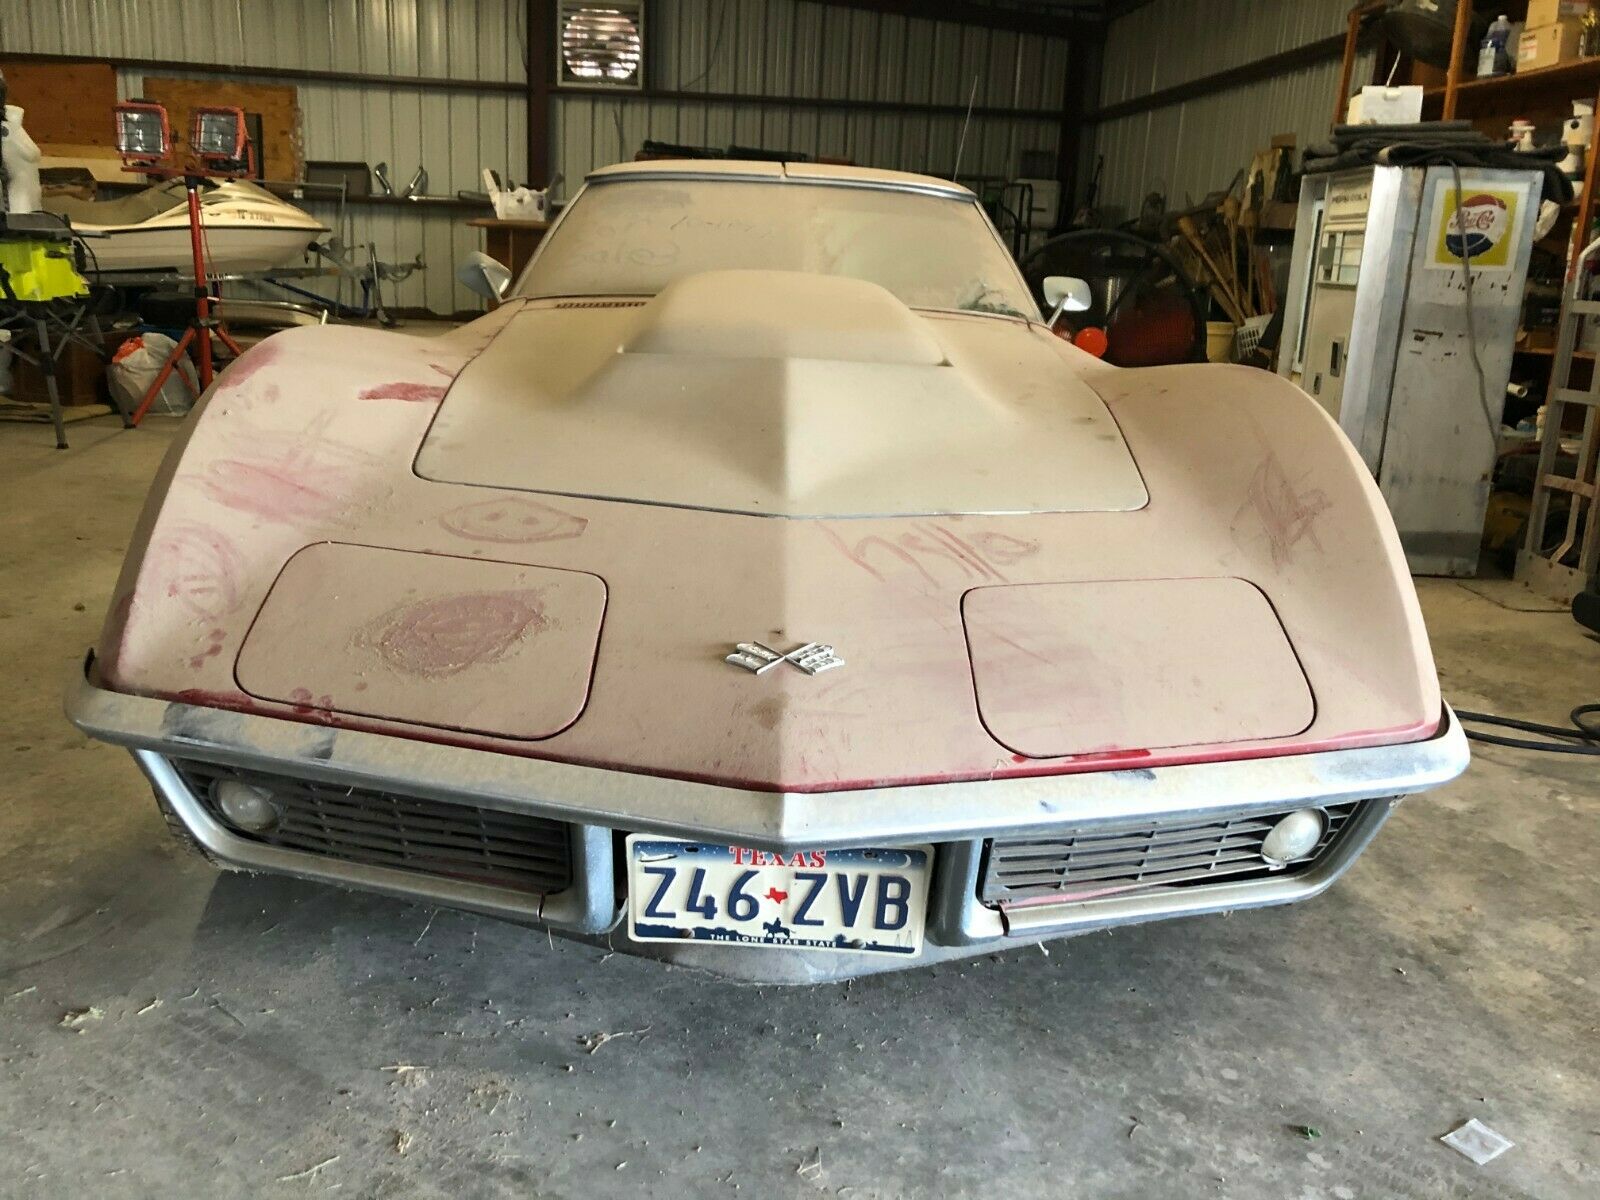 Say Hello to this Beautiful, Incredibly Dusty but Timeless C3 Barn Find